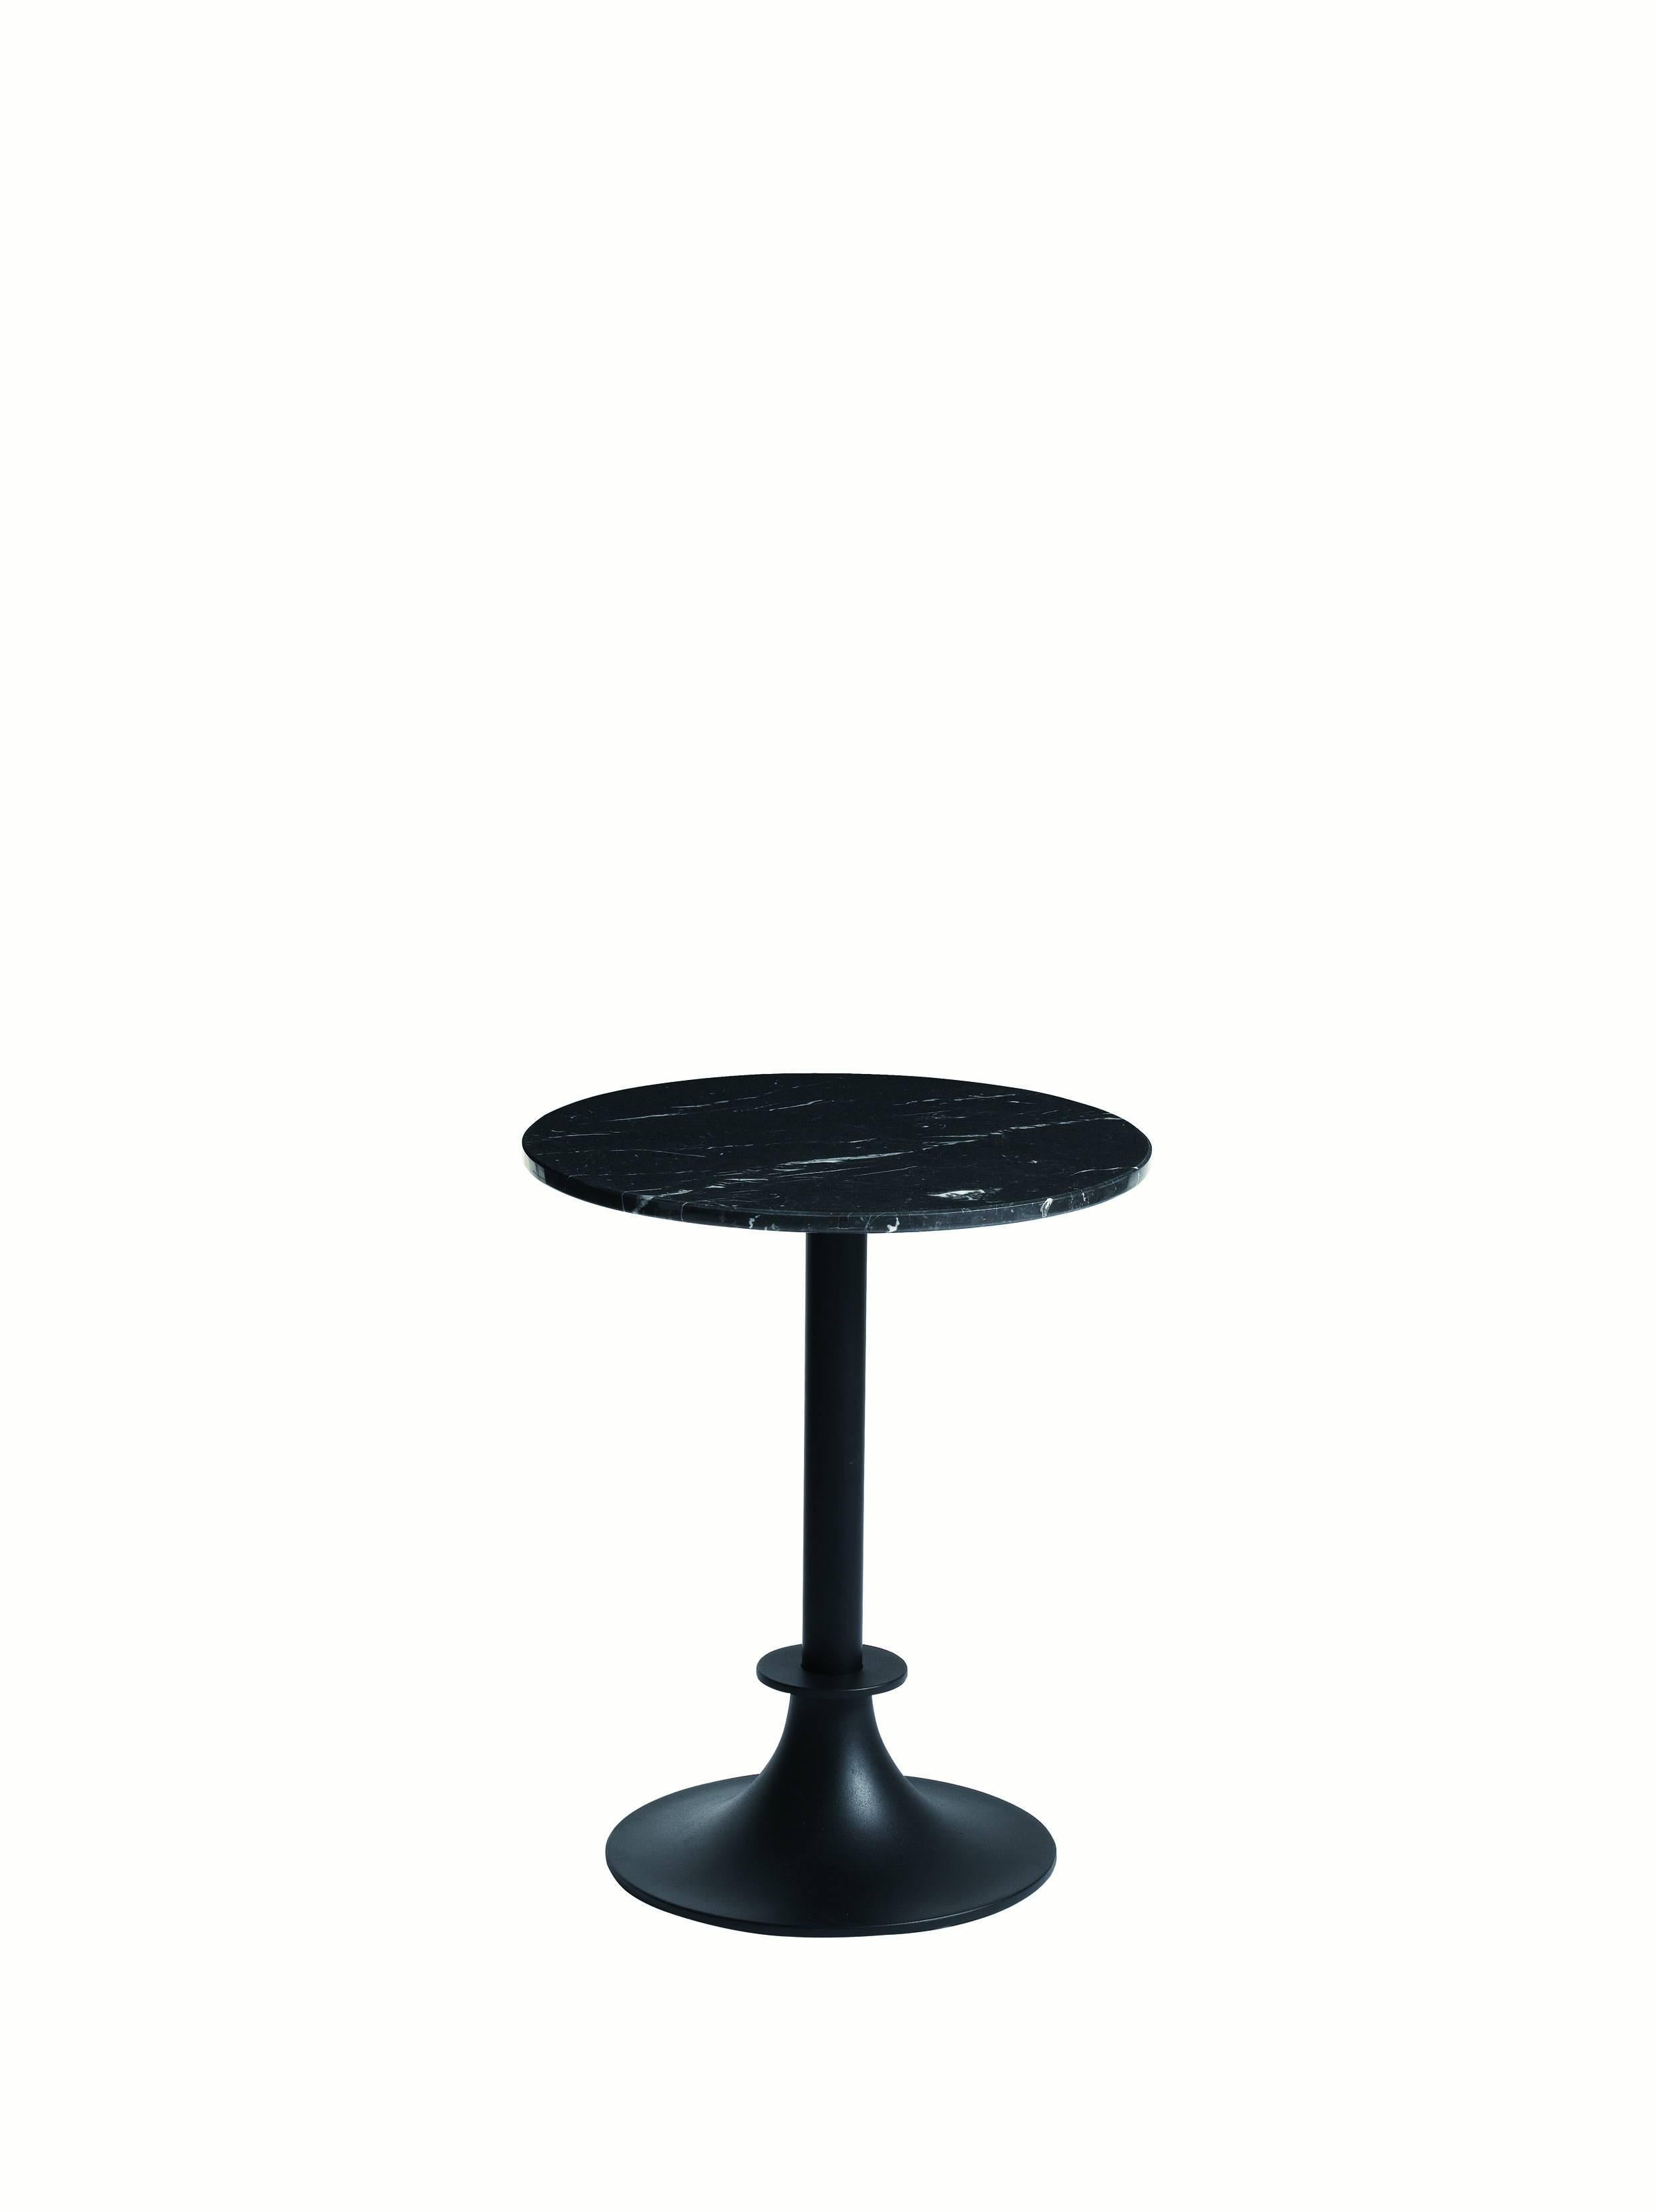 LORD YI tables by Philippe Starck for Driade

Grey or black anthracite painted aluminum base and column with round or rectangular top.

Top available in white Calcutta Carrara marble or black Marquina marble, for indoor/outdoor use.

A 9 kg